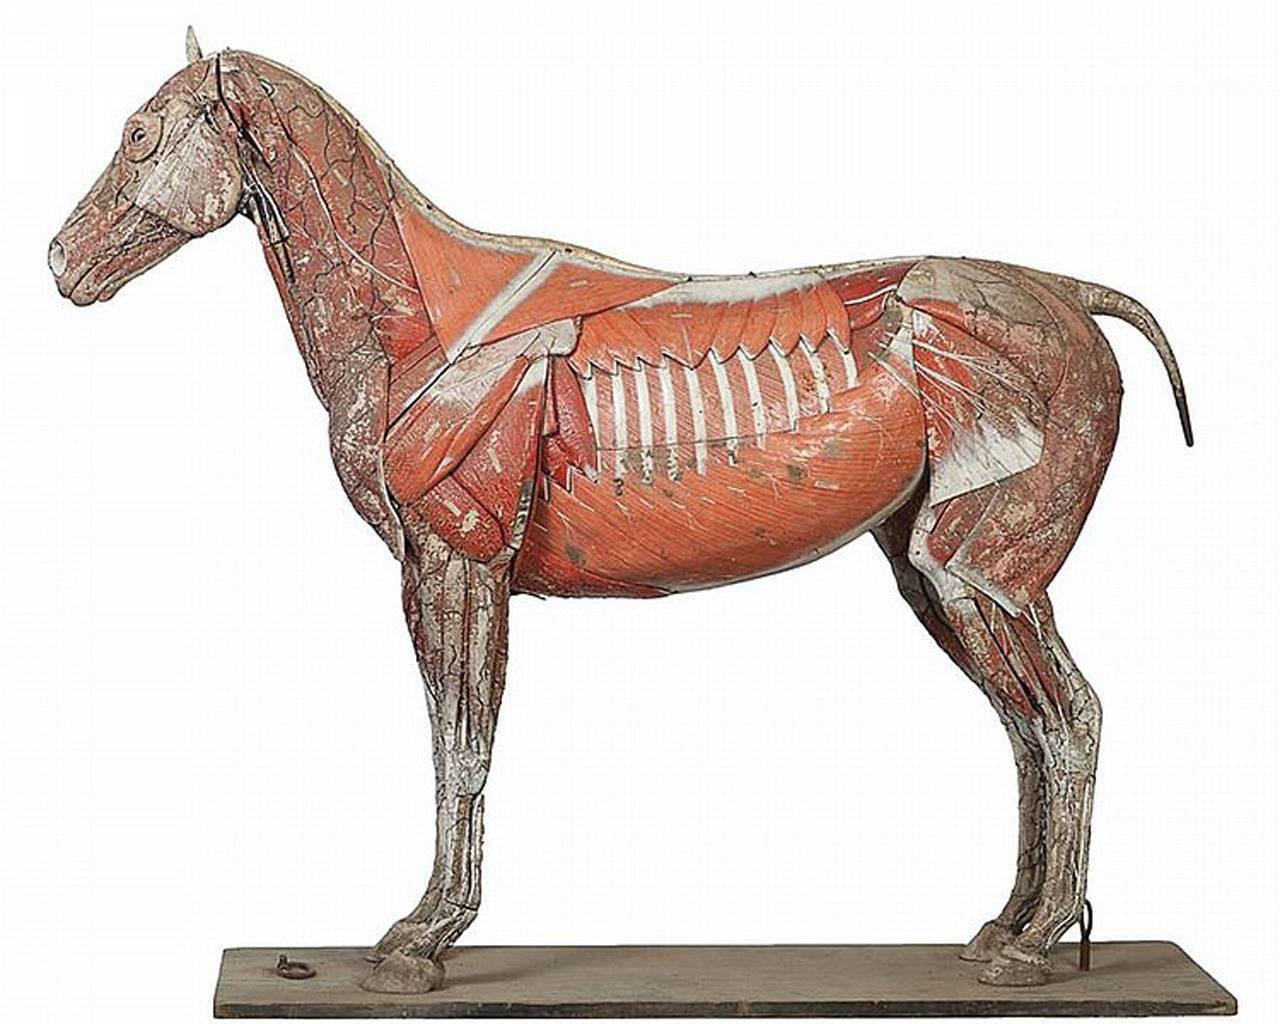 This is one of the largest and rarest of the Dr. Auzoux papier mâché anatomical models. It’s also one of our most ambitious offerings. This prized 1846 first generation handmade model dates to the mid-1800s. I am told that there are almost 200